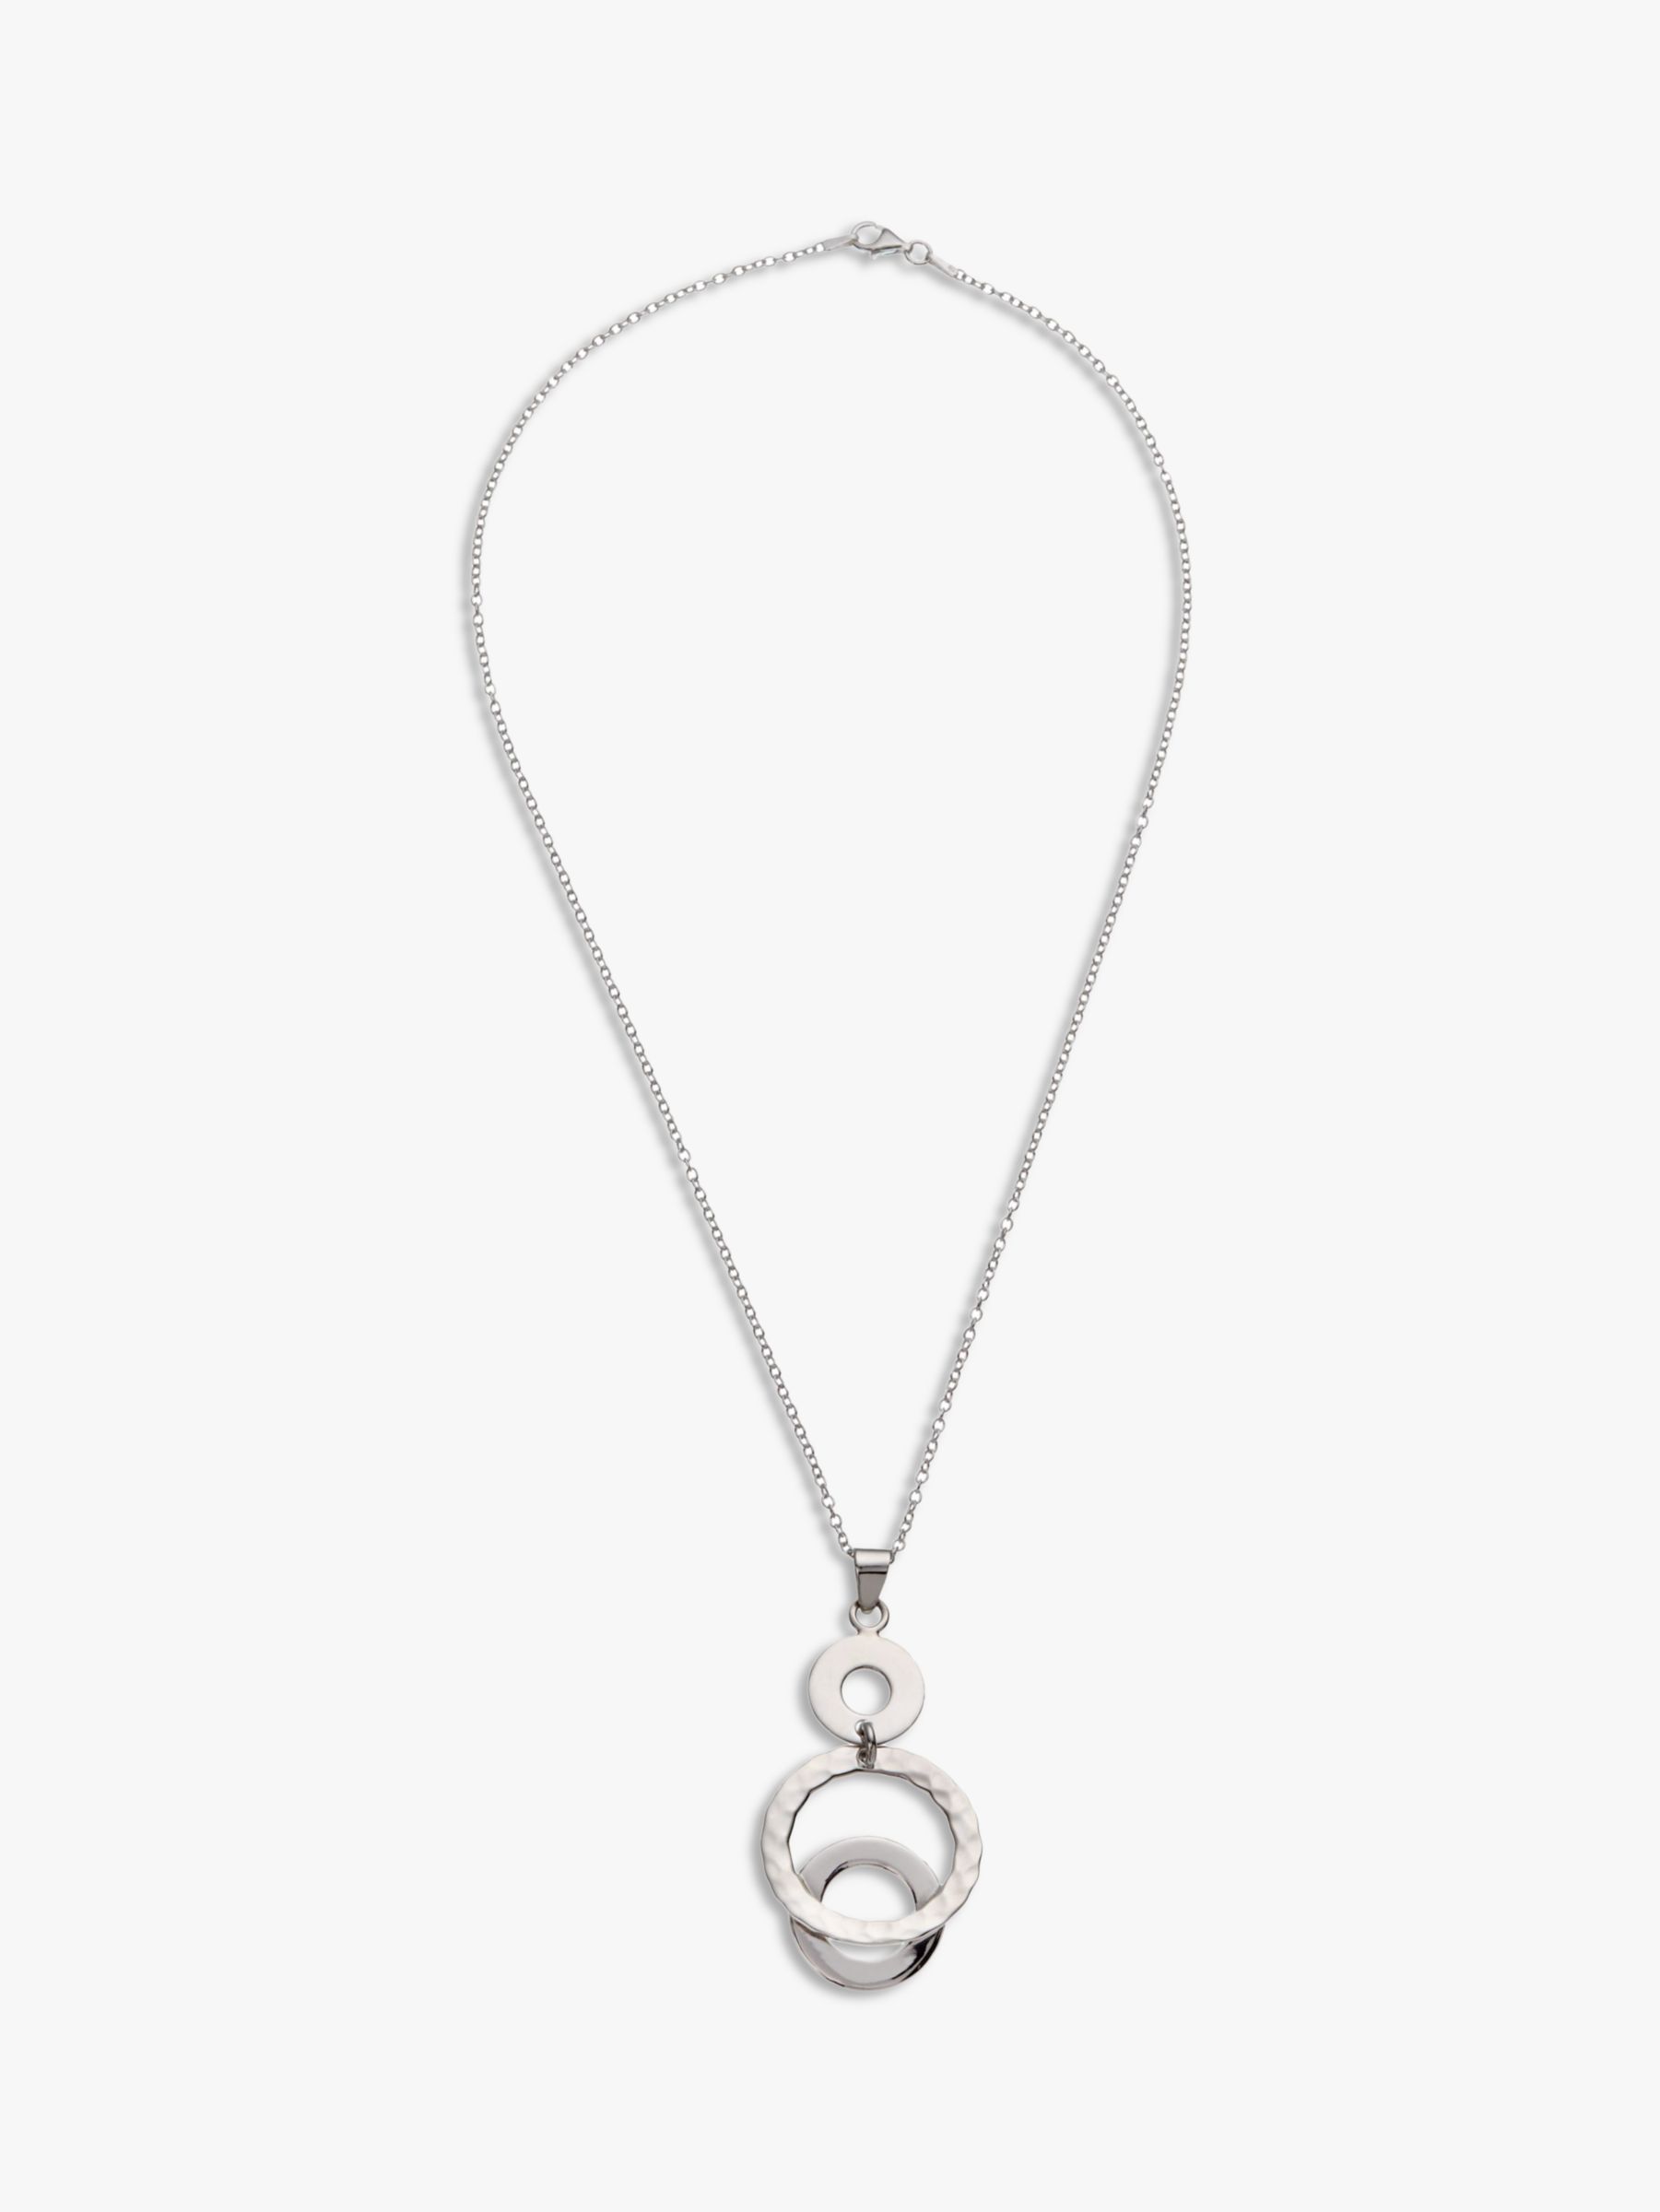 Andea Hammered Circle Pendant Necklace, Silver at John Lewis & Partners